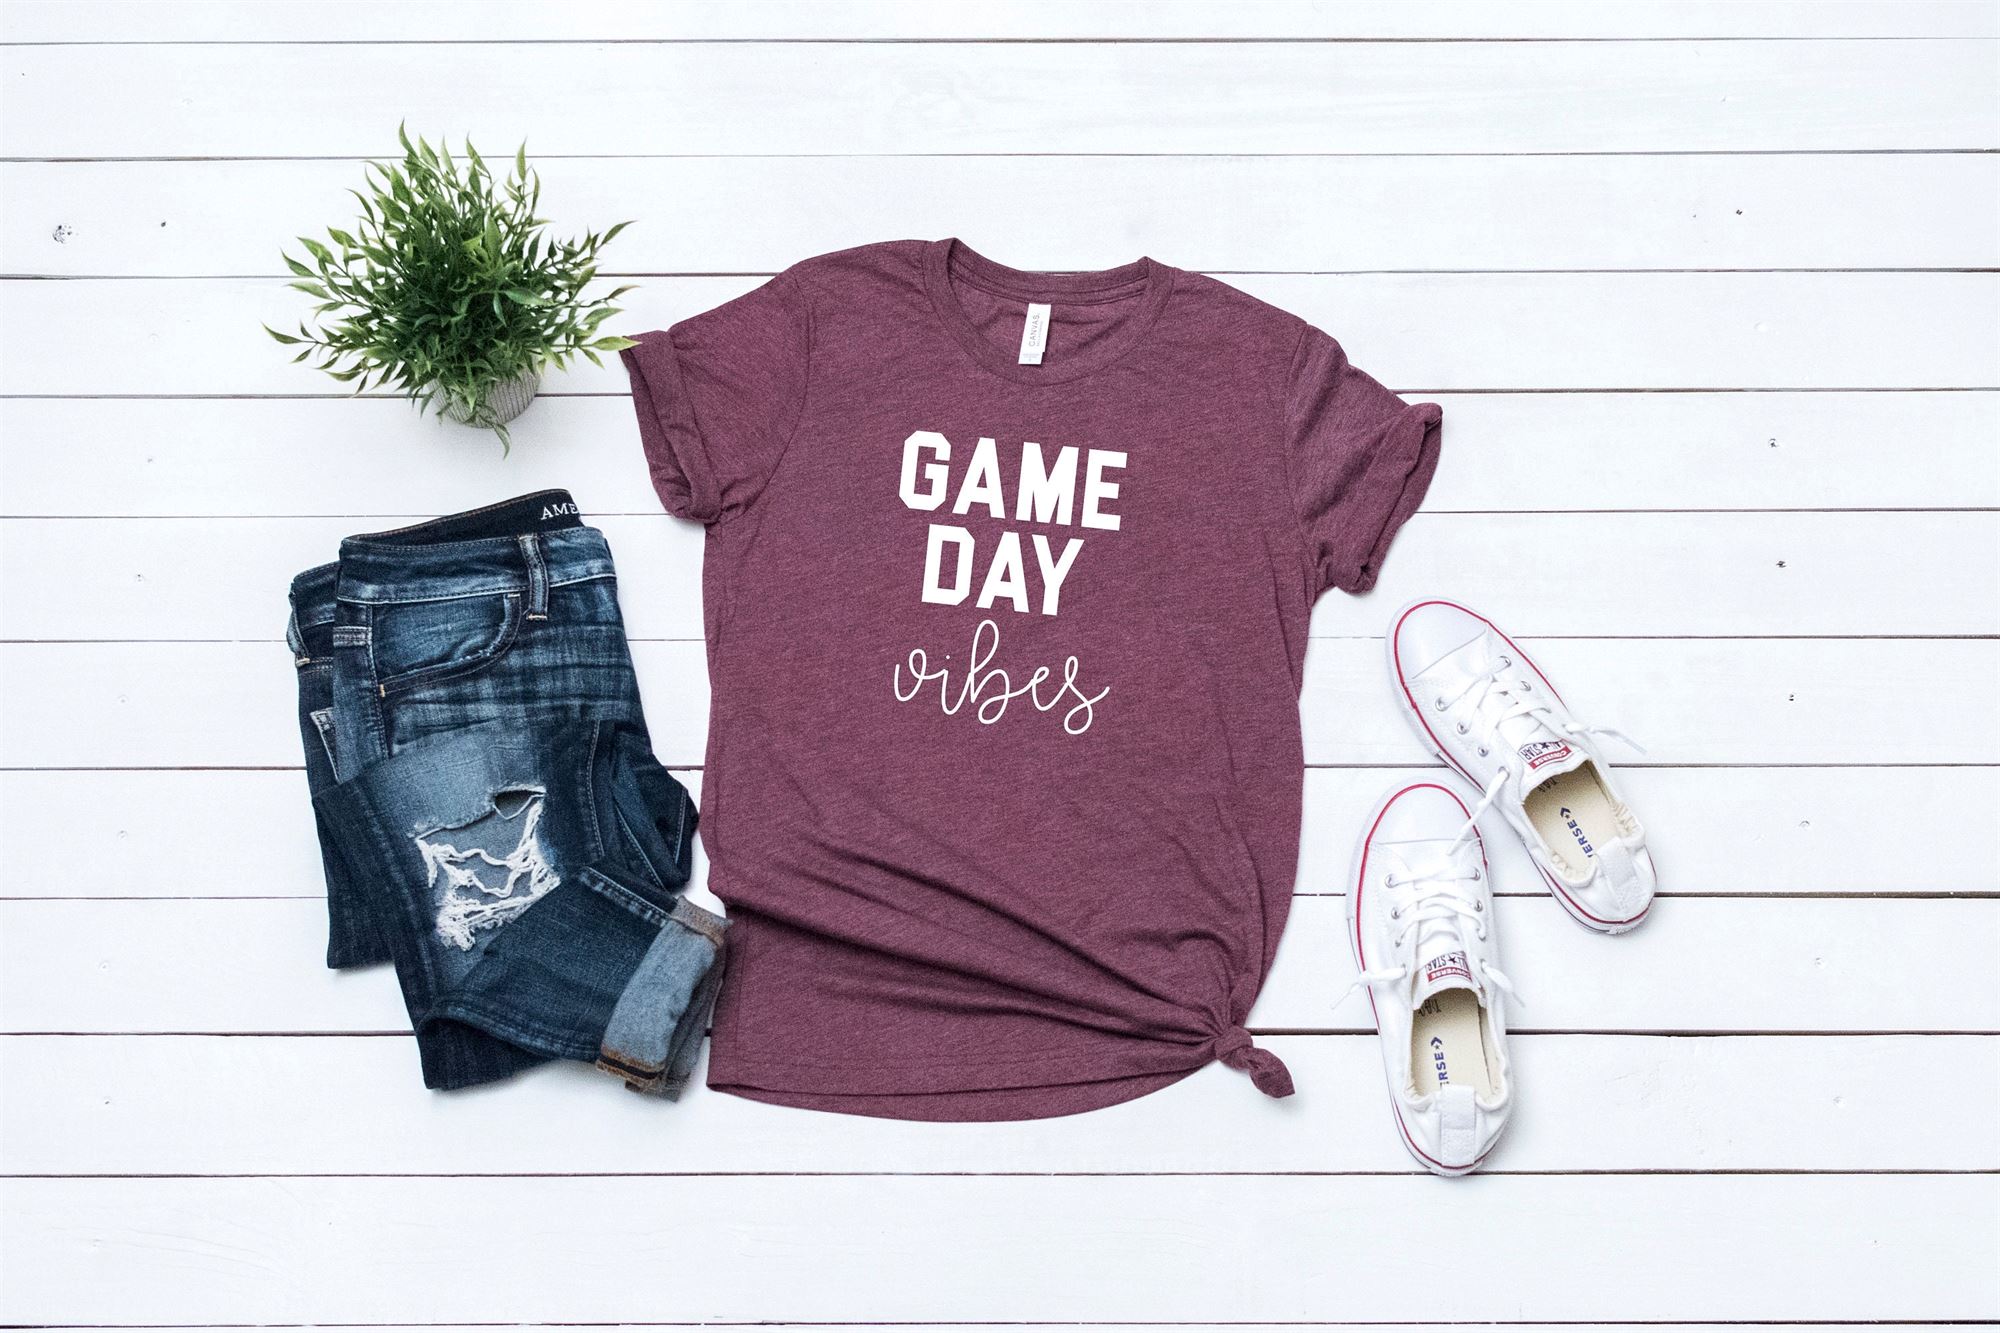 Special Game Day Vibes Womens Football Shirt Football Shirt Womens Football Tee Cute Football Shir Sunday Football Shirt Cute Womens Football 